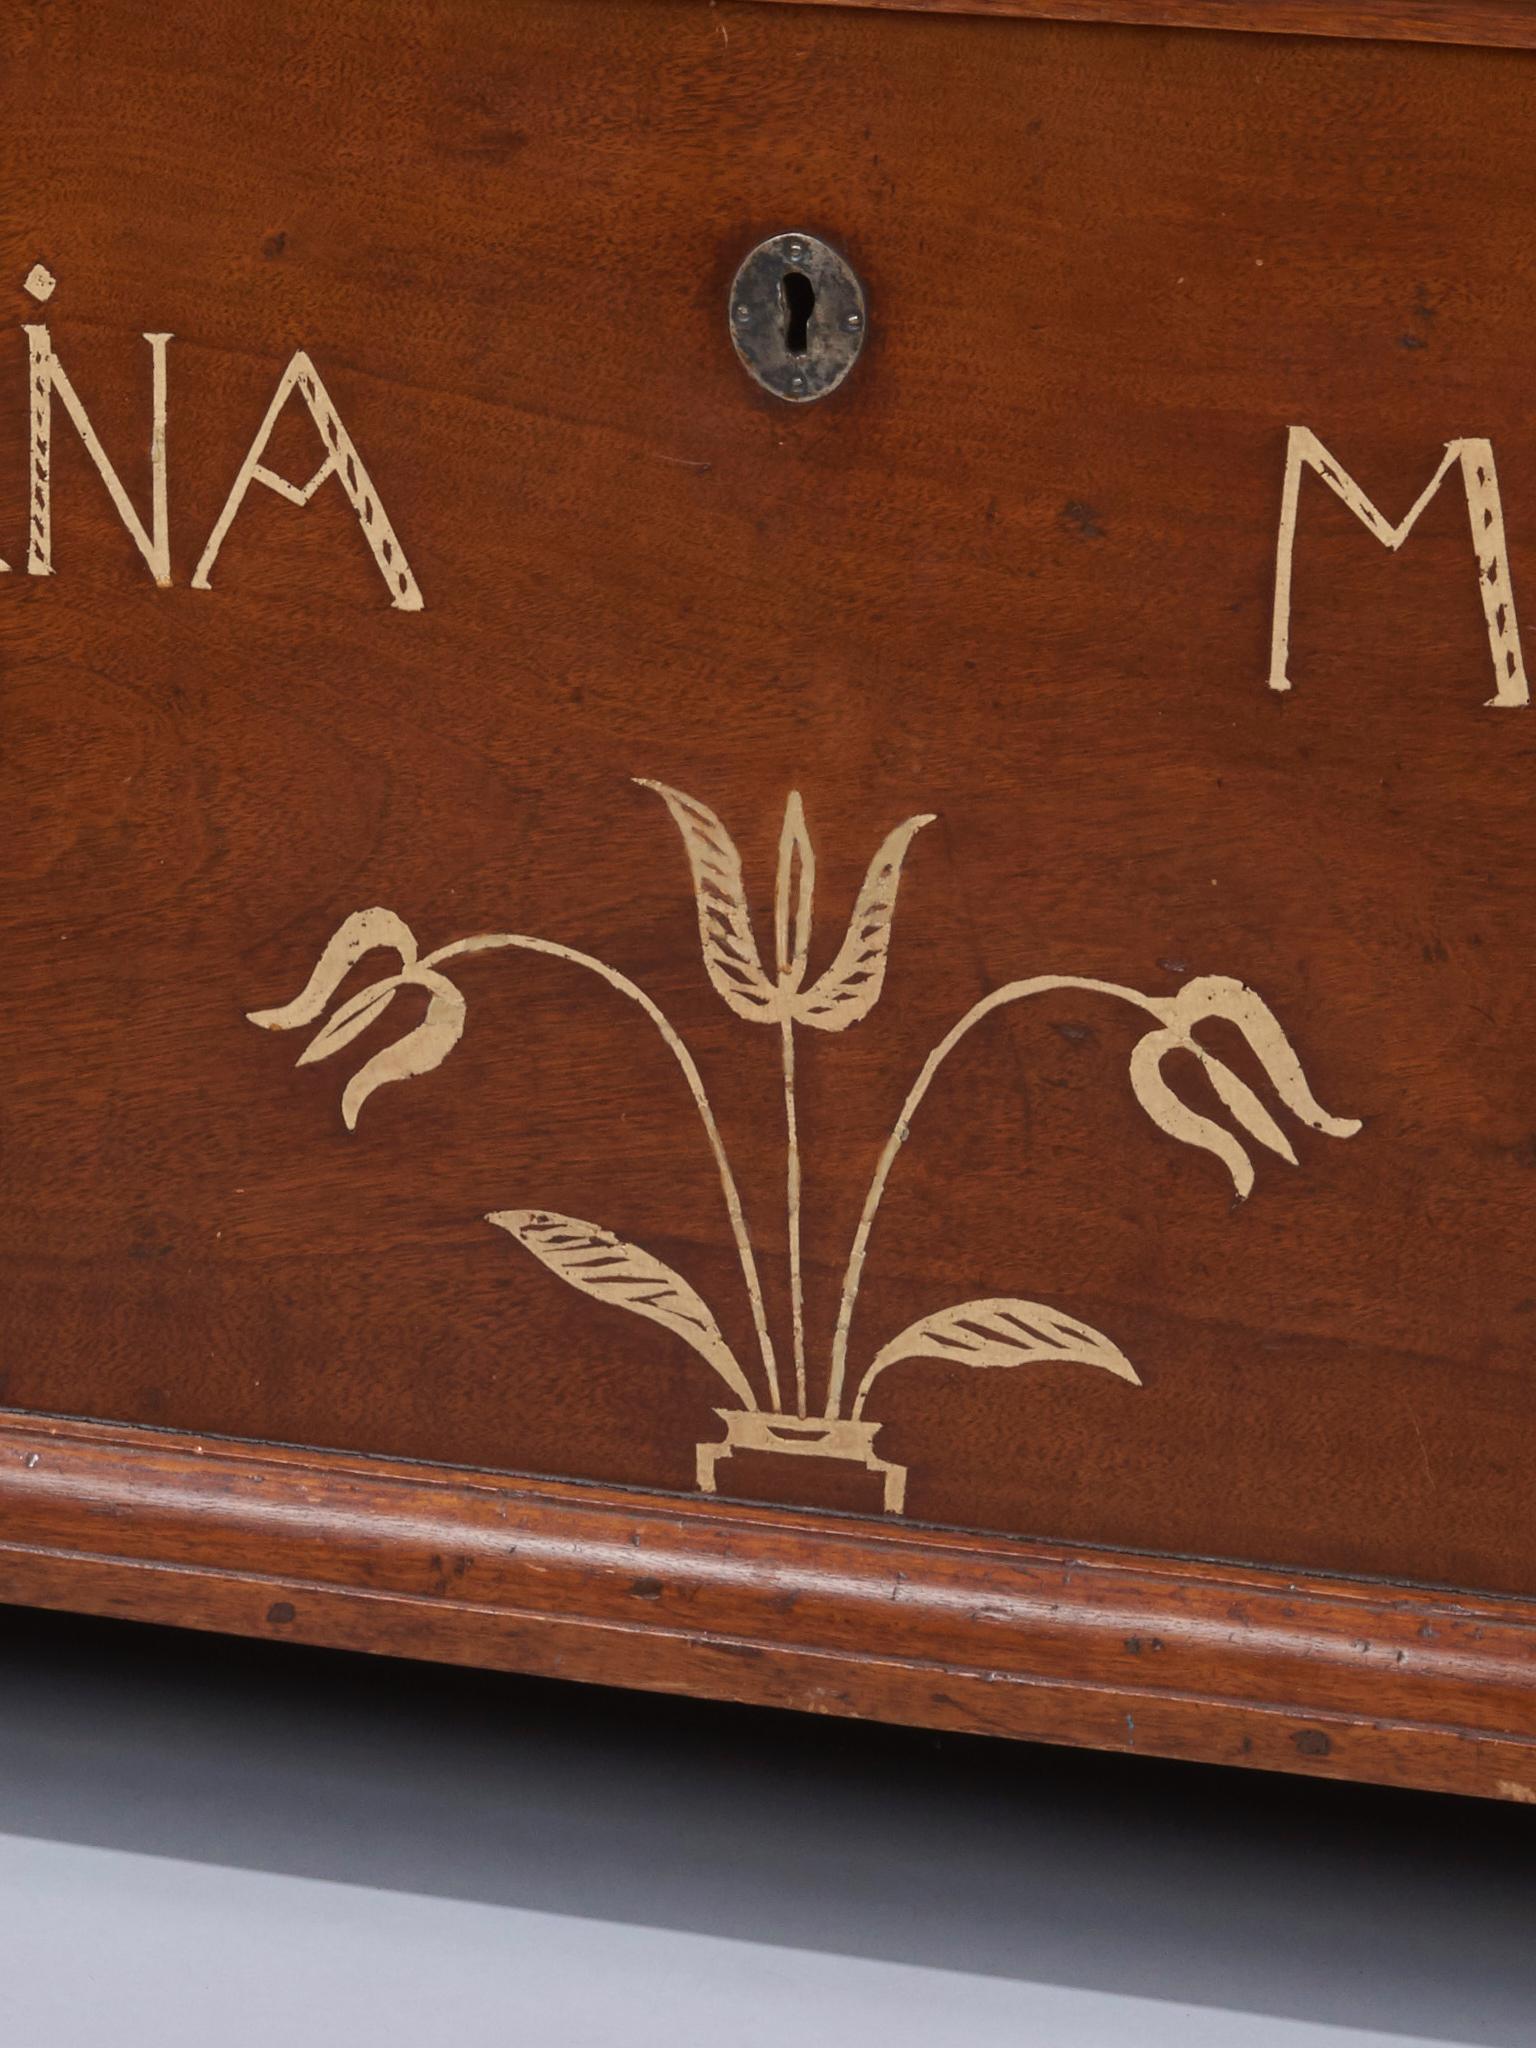 Made for Cadarina Moser, Lancaster, PA in 1801. Inlaid tulips and resting on ogee feet. Iron strap hinges inside. Pictured and mentioned in 